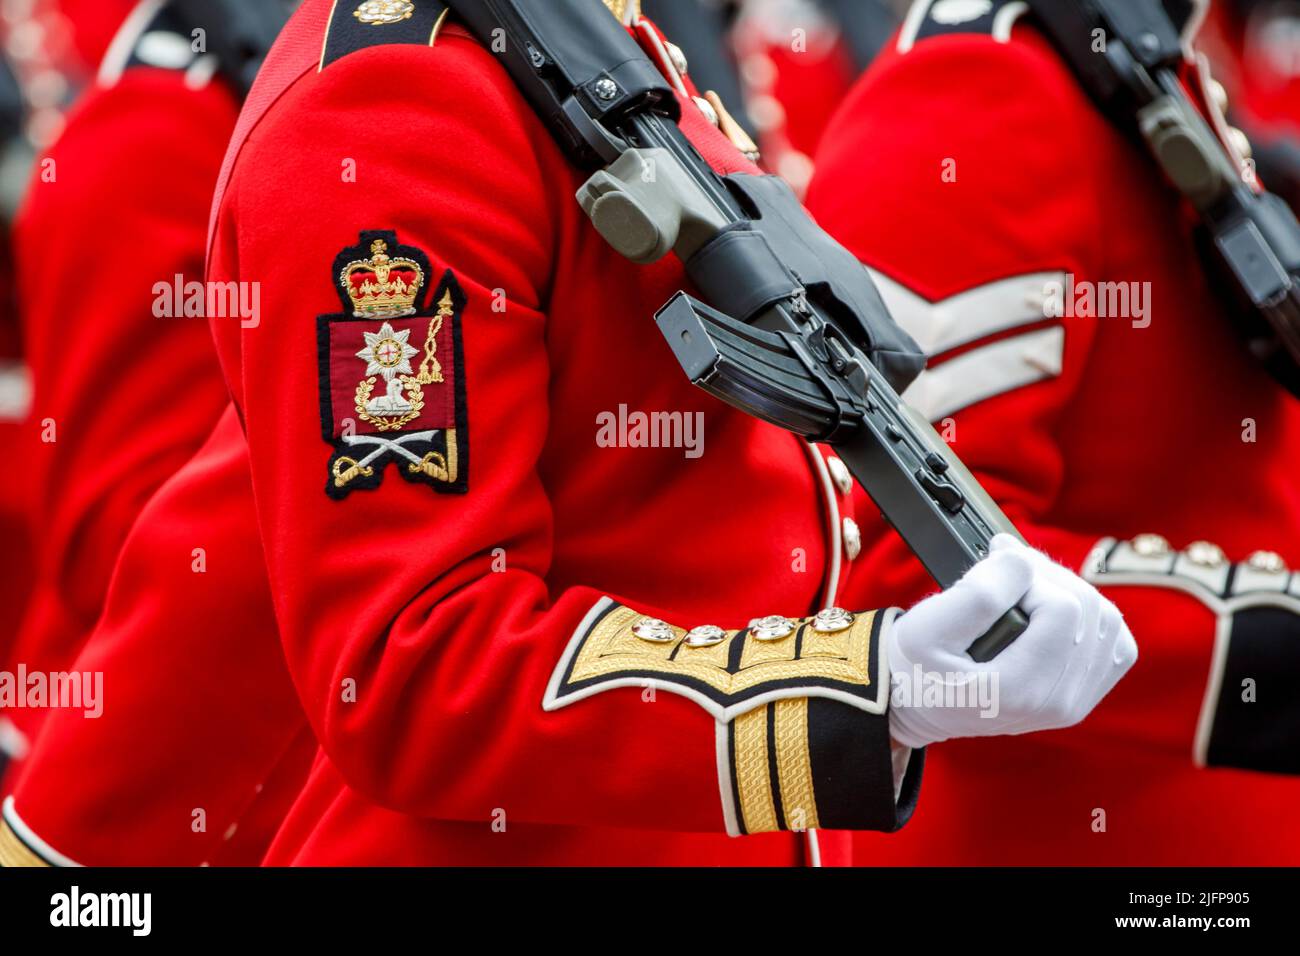 Warrant Officer of Coldstream Guards at Trooping the Colour, Colonel’s Review in The Mall, London, England, United Kingdom on Saturday, May 28, 2022. Stock Photo